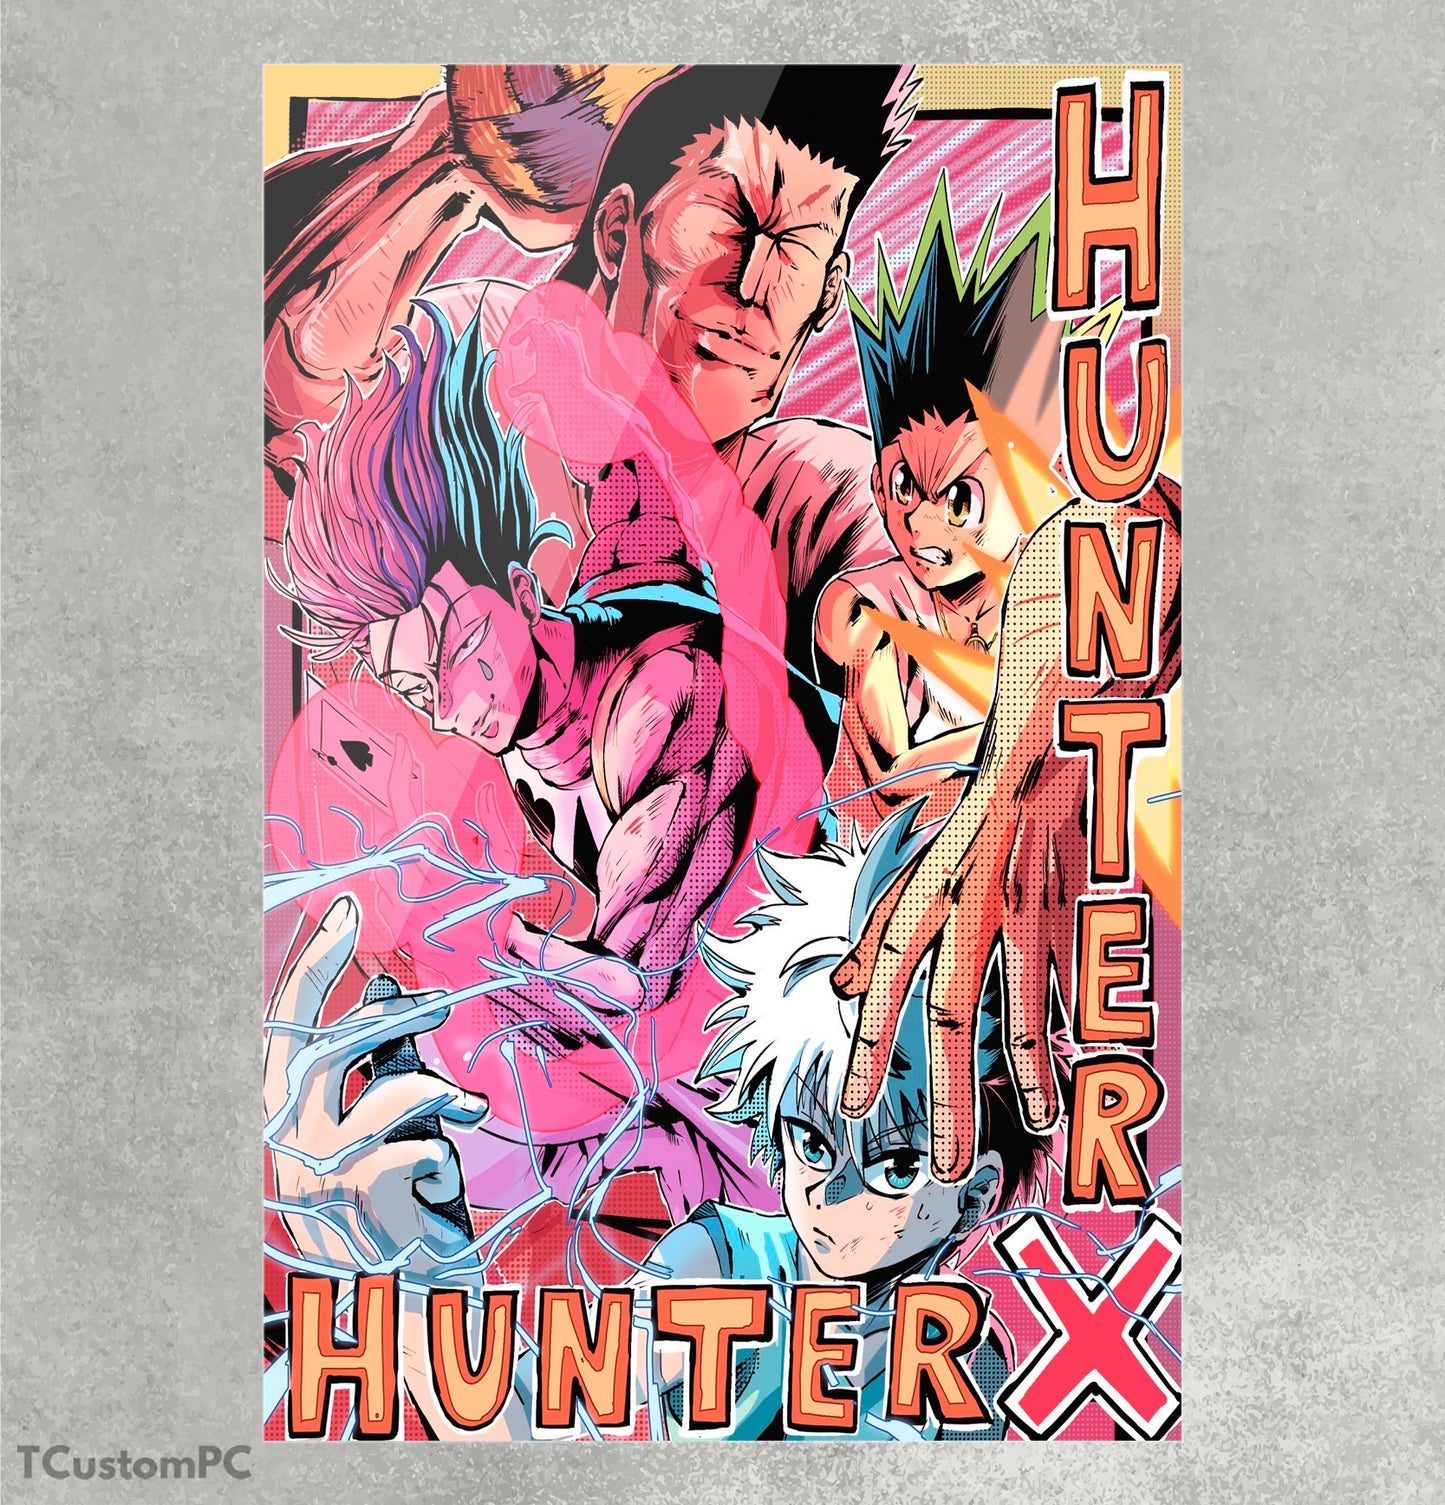 Hunter x Hunter Cover painting